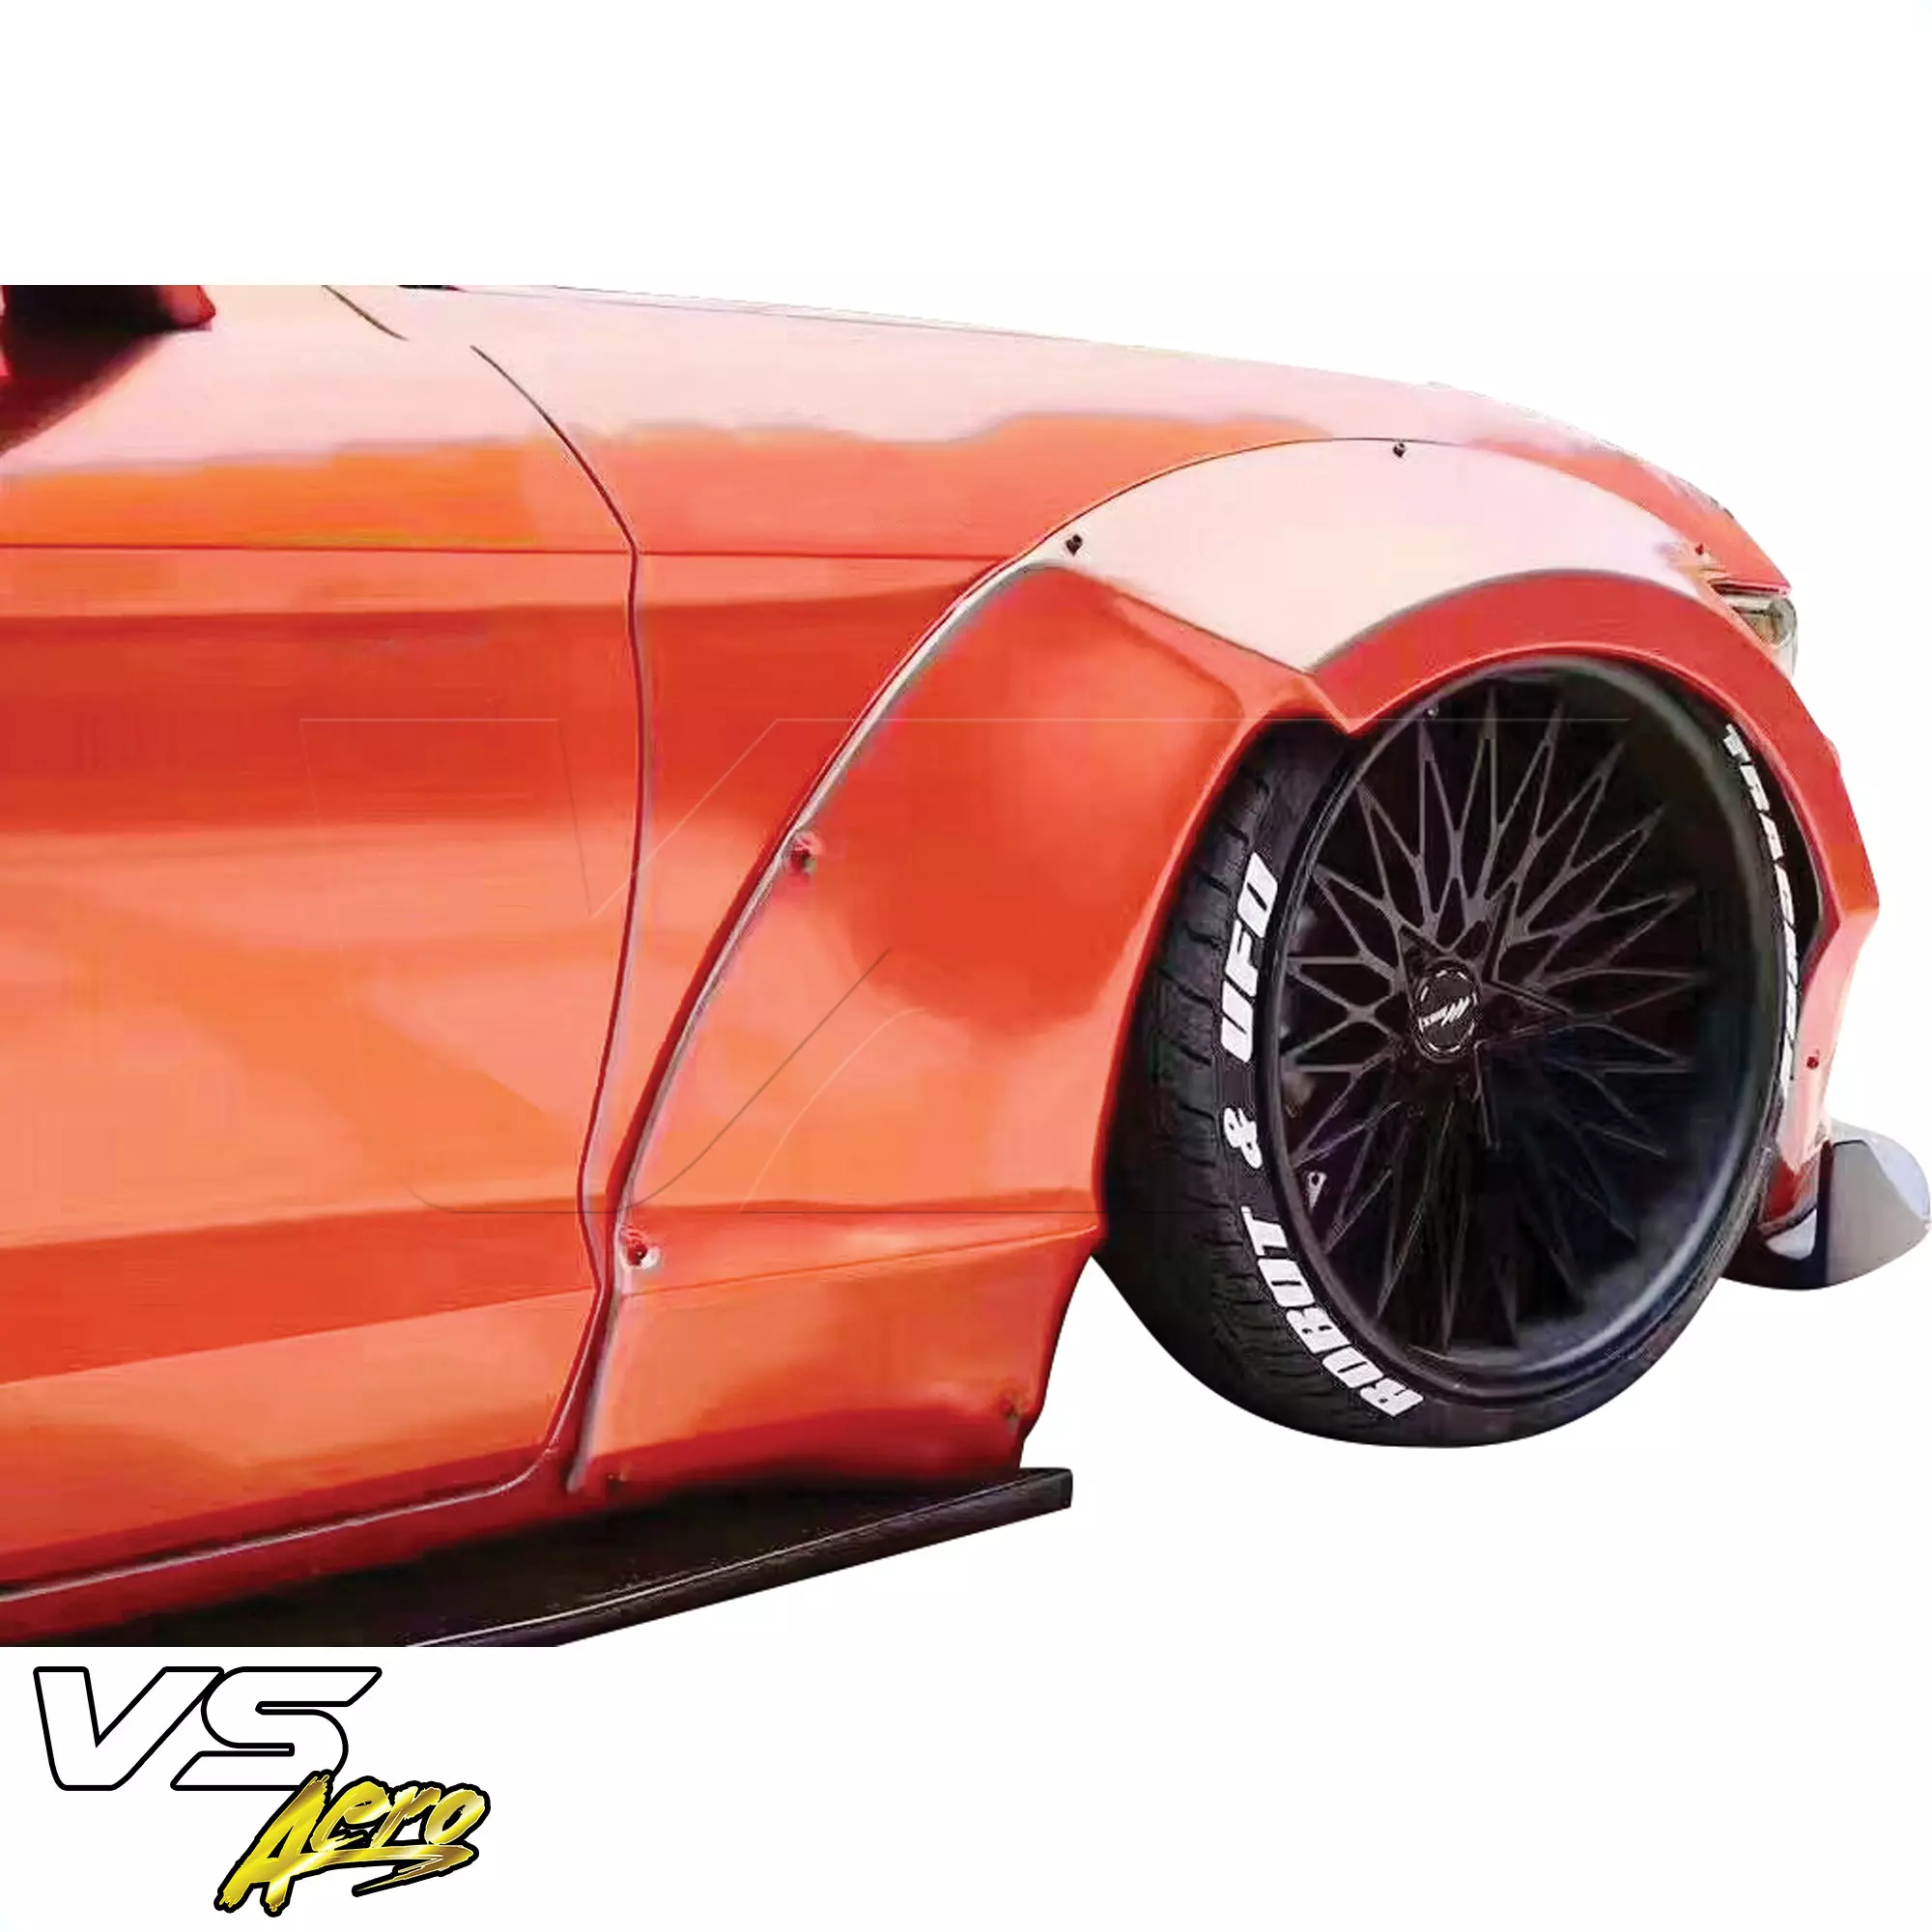 VSaero FRP RBOT Wide Body Fender Flares (front) > Ford Mustang 2015-2017 - Image 7